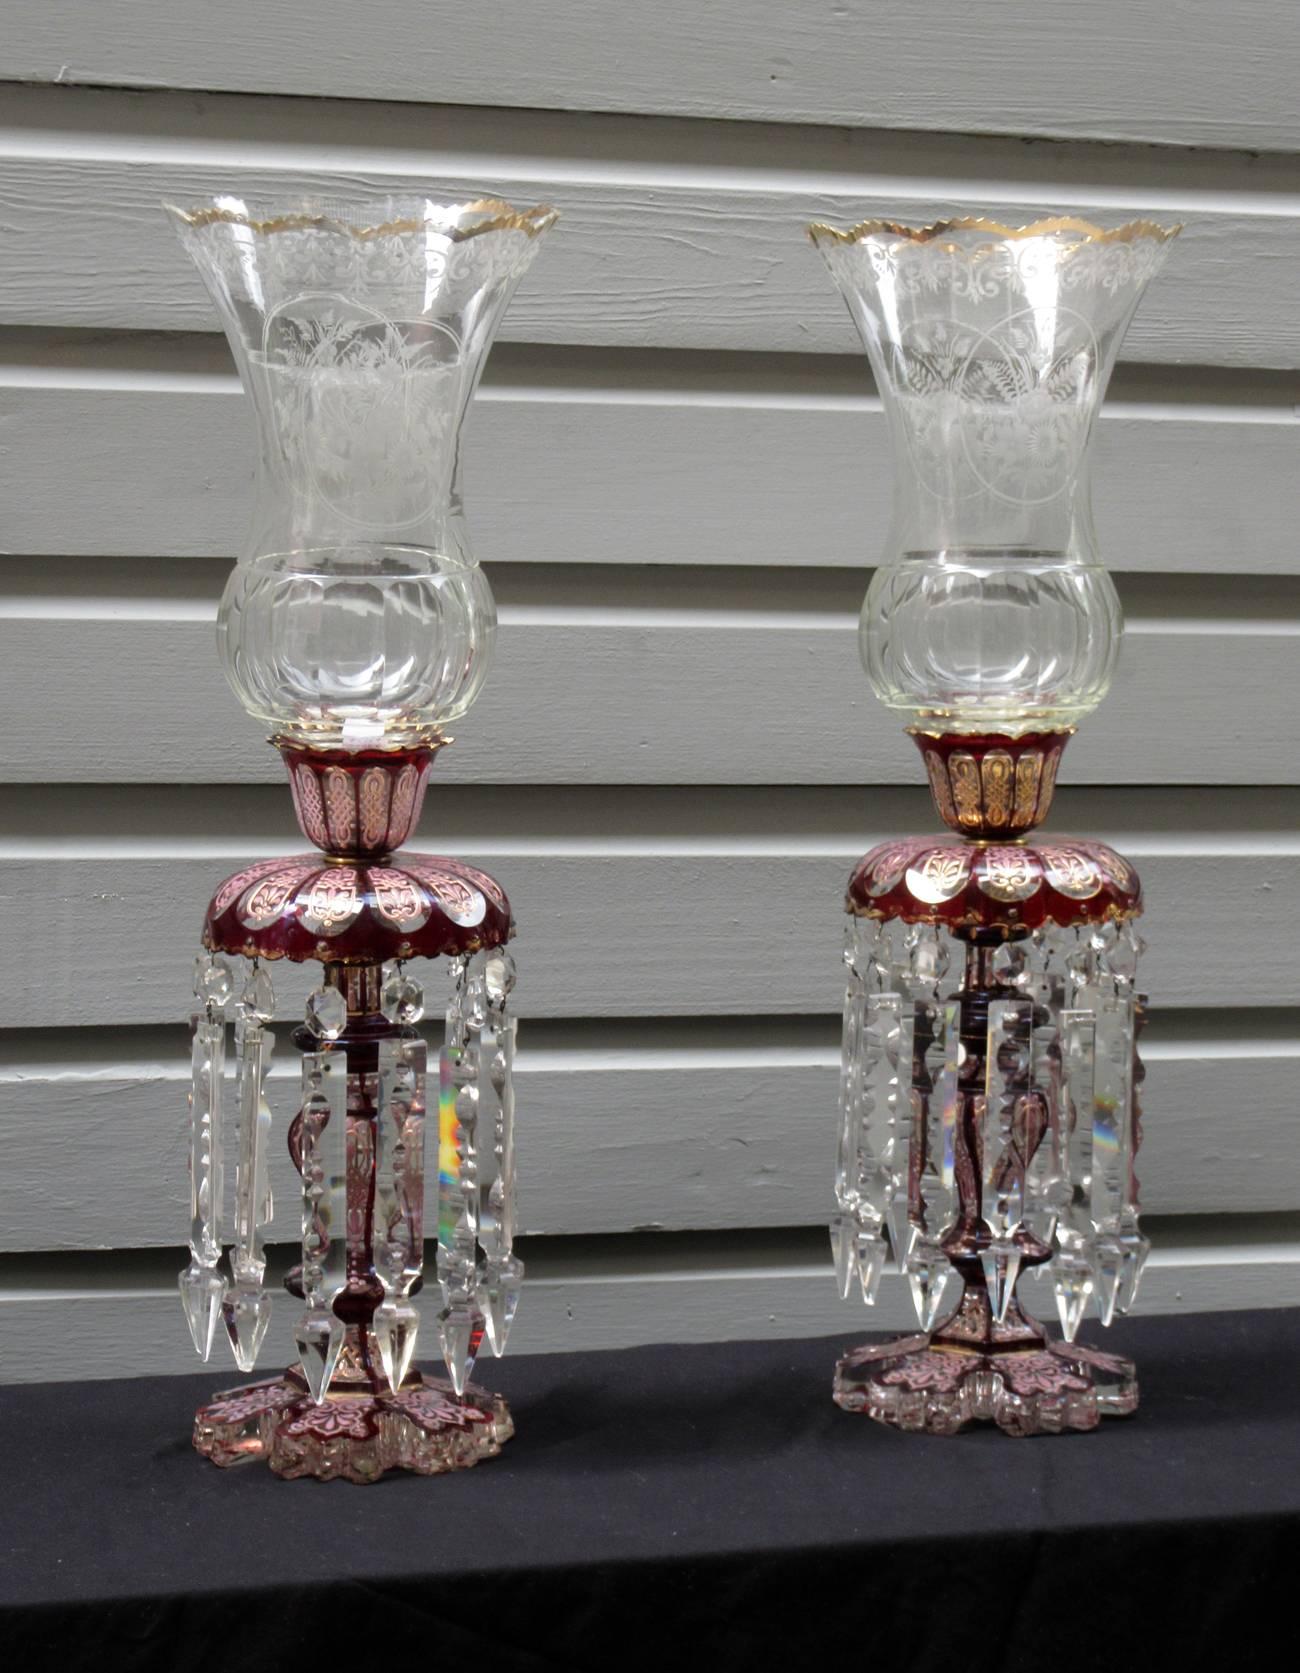 A sizable pair of late 19th century French Baccarat cranberry crystal lusters, circa 1880, accented with rose and gilt enameling and etched crystal hurricanes featuring floral bouquet motifs.